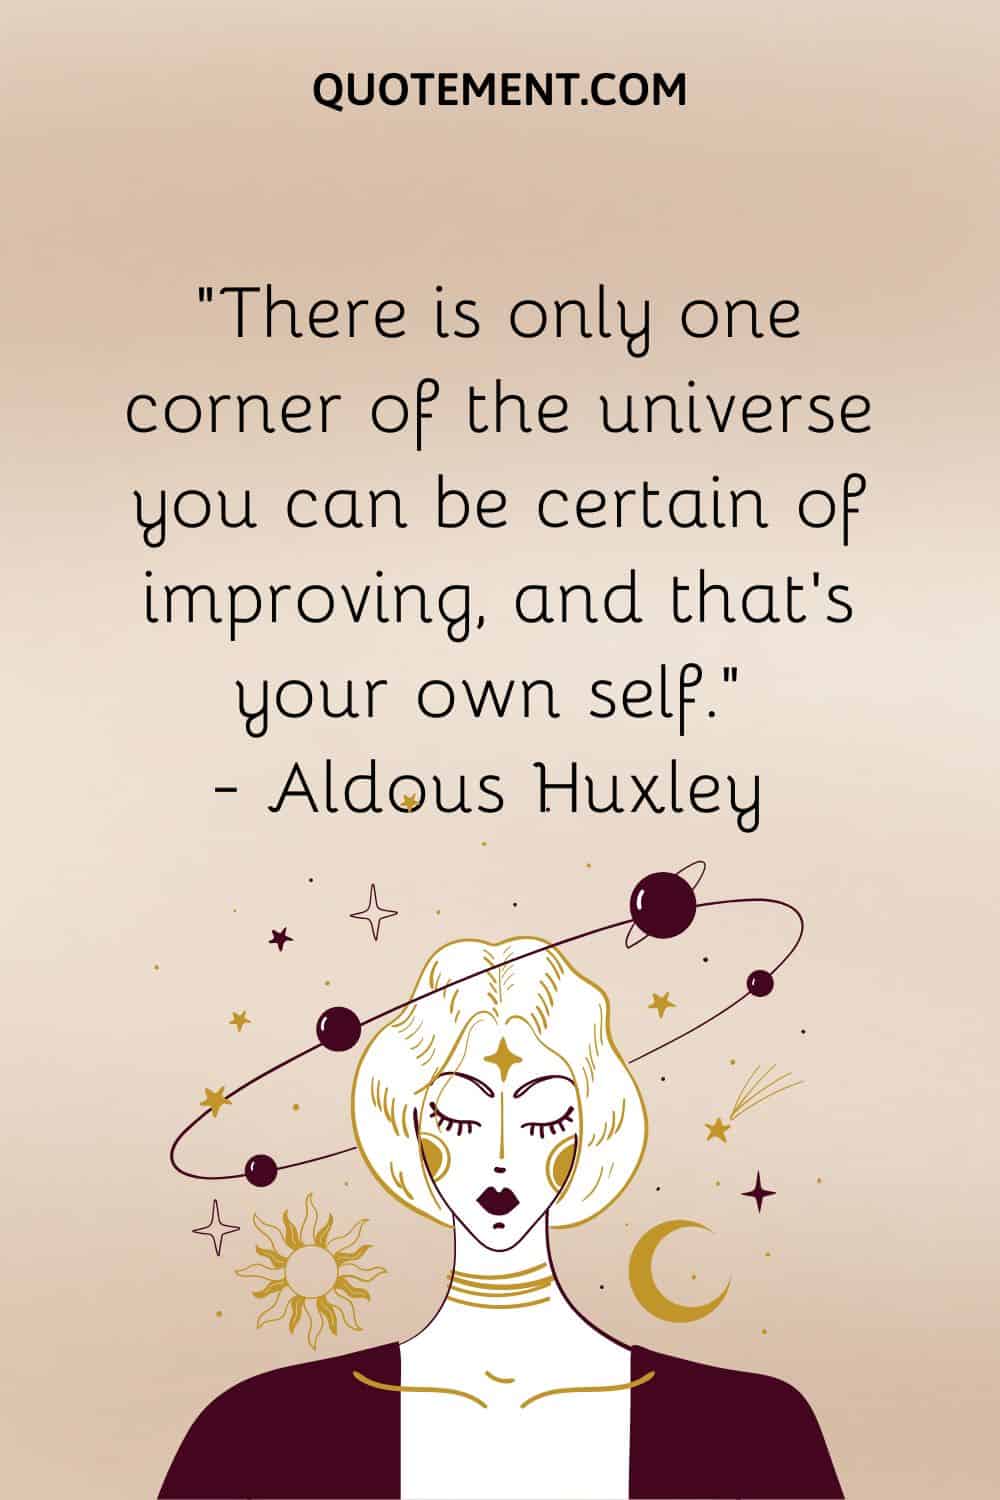 There is only one corner of the universe you can be certain of improving, and that’s your own self.